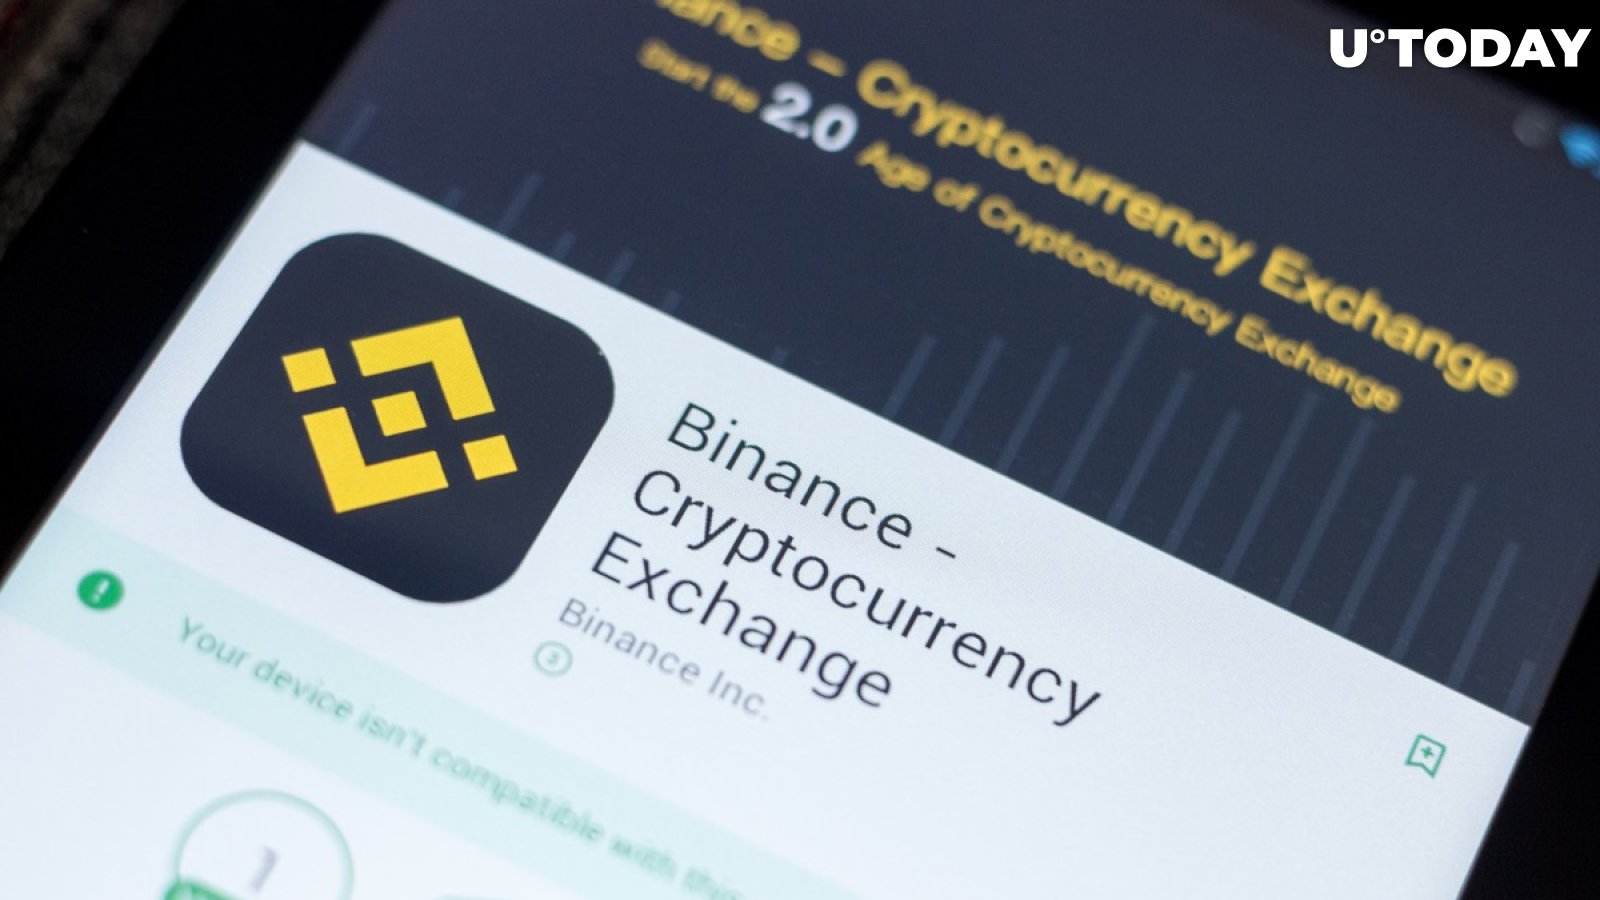 Binance CEO Says He’s Not Trying to Fight FTX